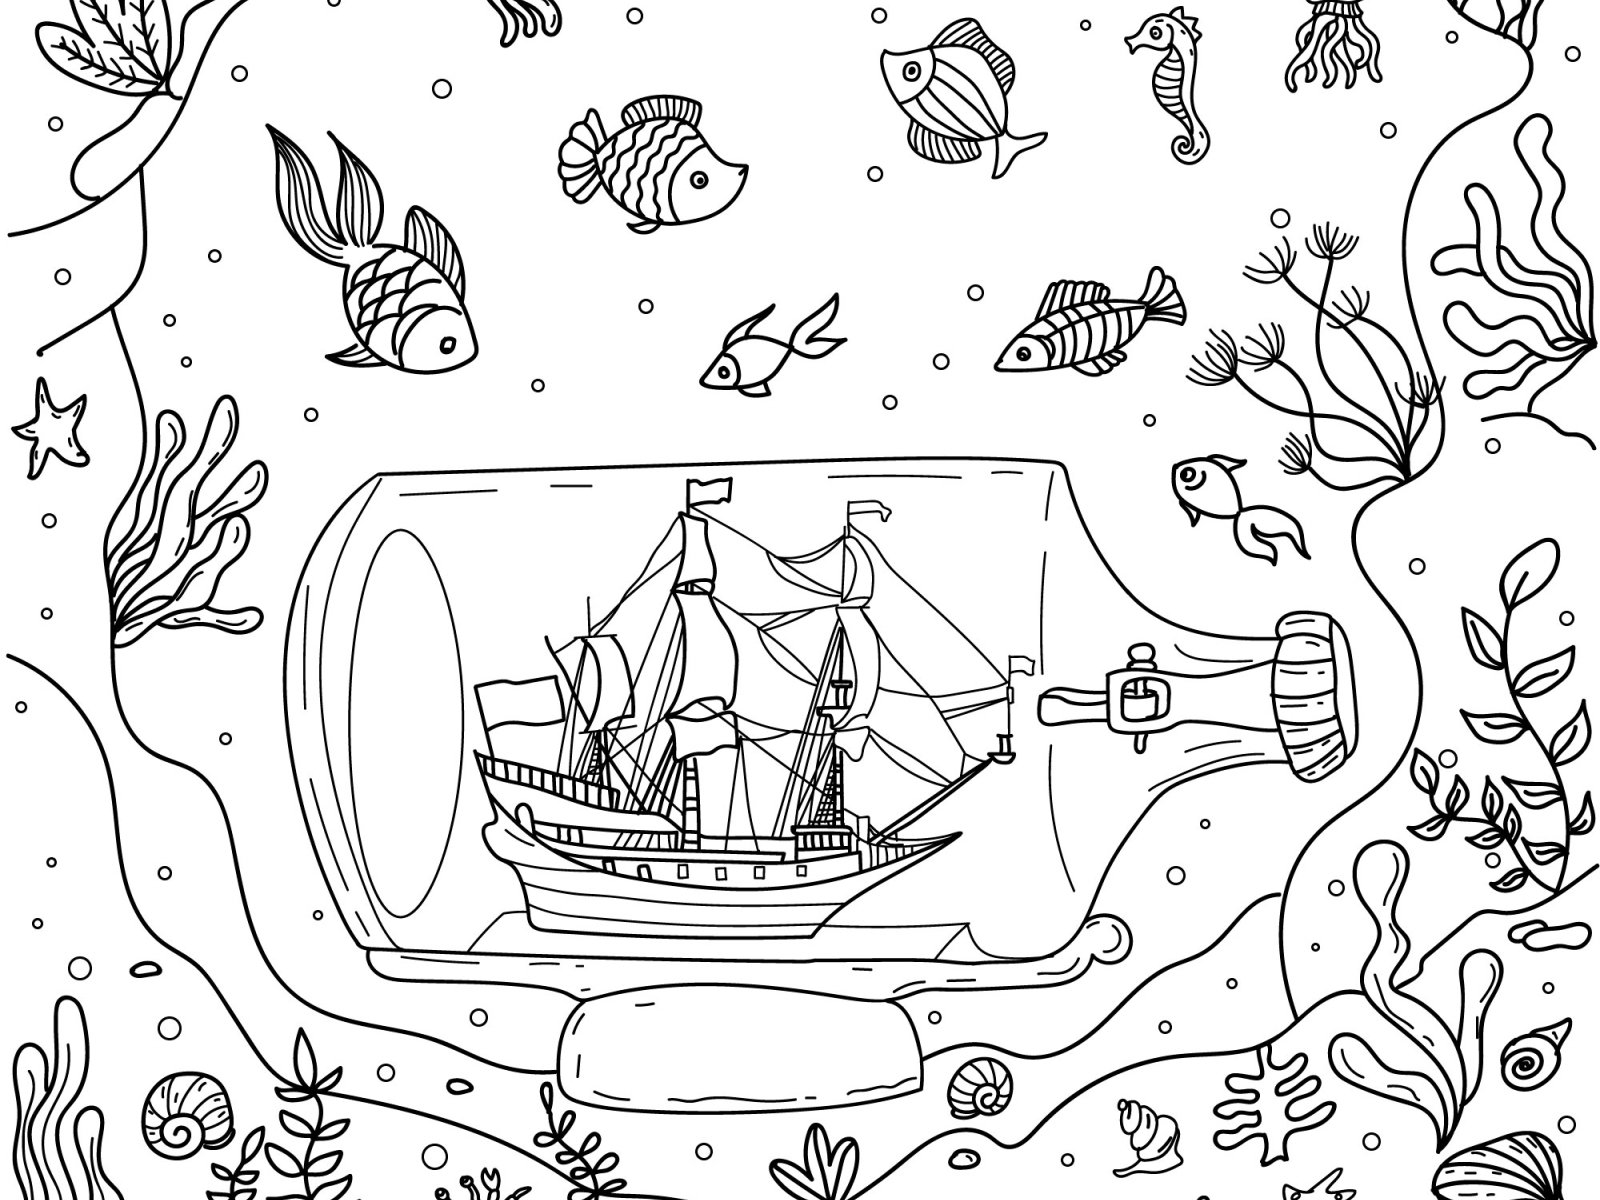 Ocean. Creative coloring book for adults